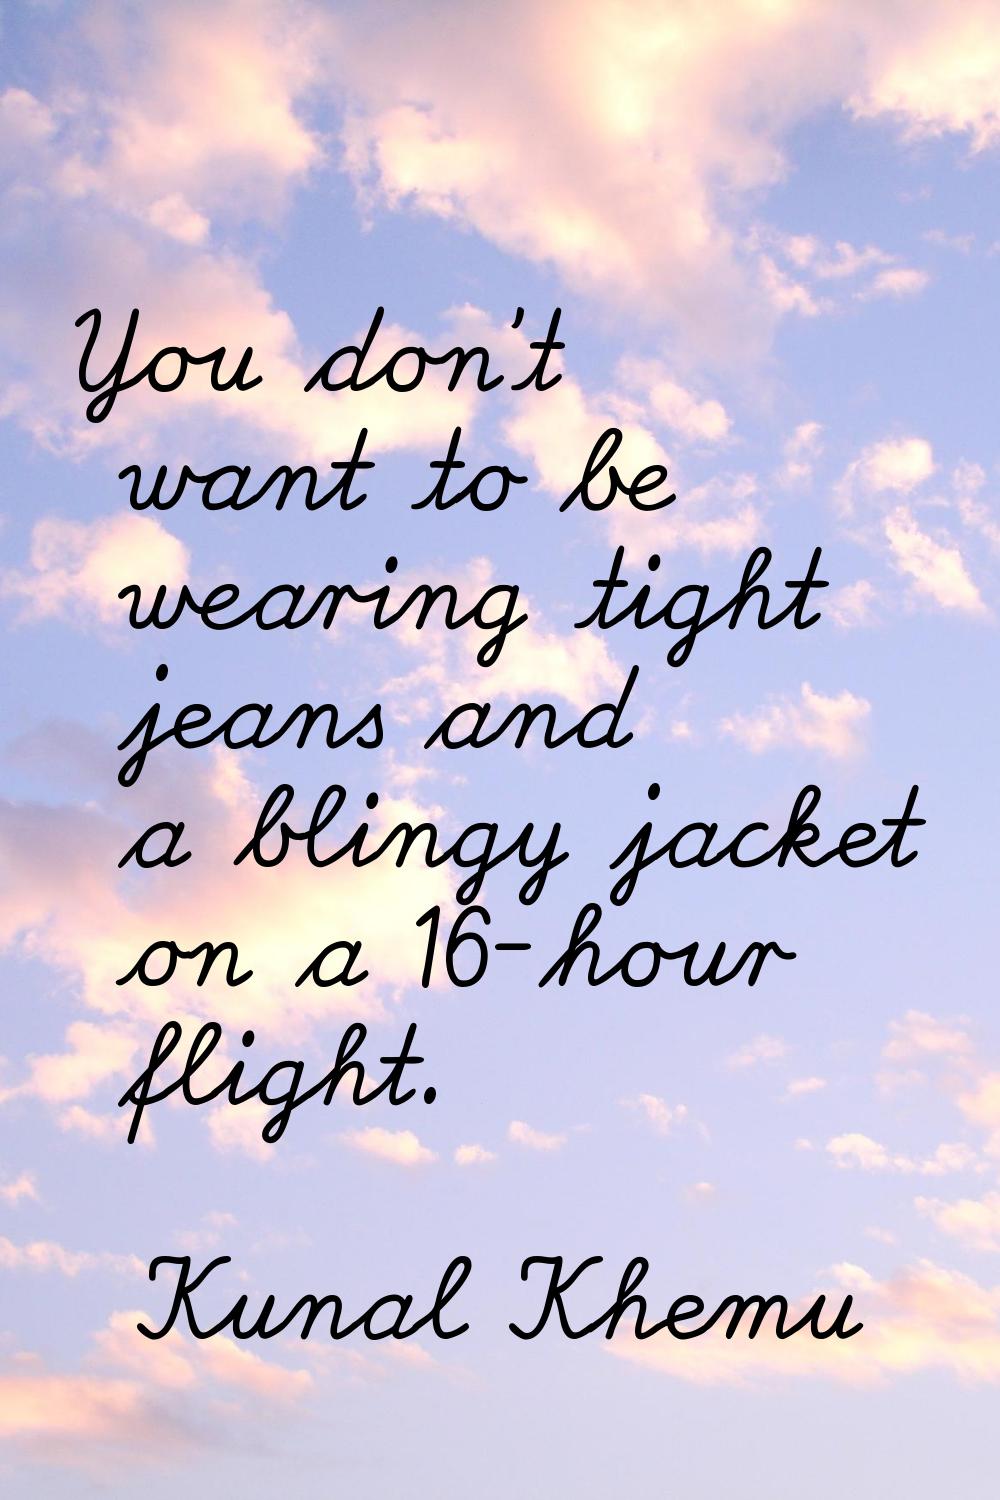 You don't want to be wearing tight jeans and a blingy jacket on a 16-hour flight.